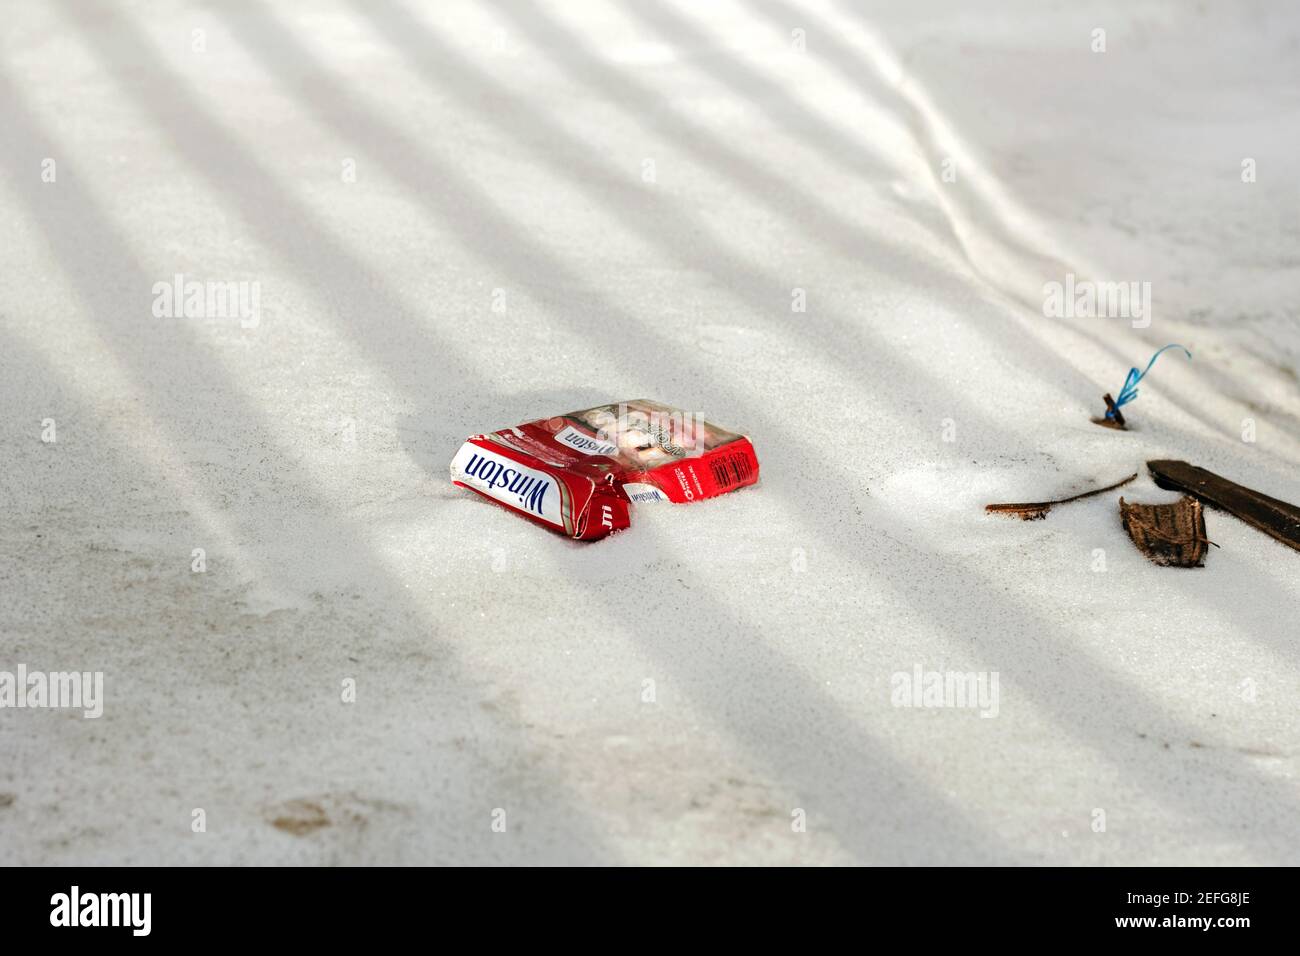 February, 3, 2017, - Moscow, Russia: red pack of Winston cigarettes in snow for editorial use Stock Photo